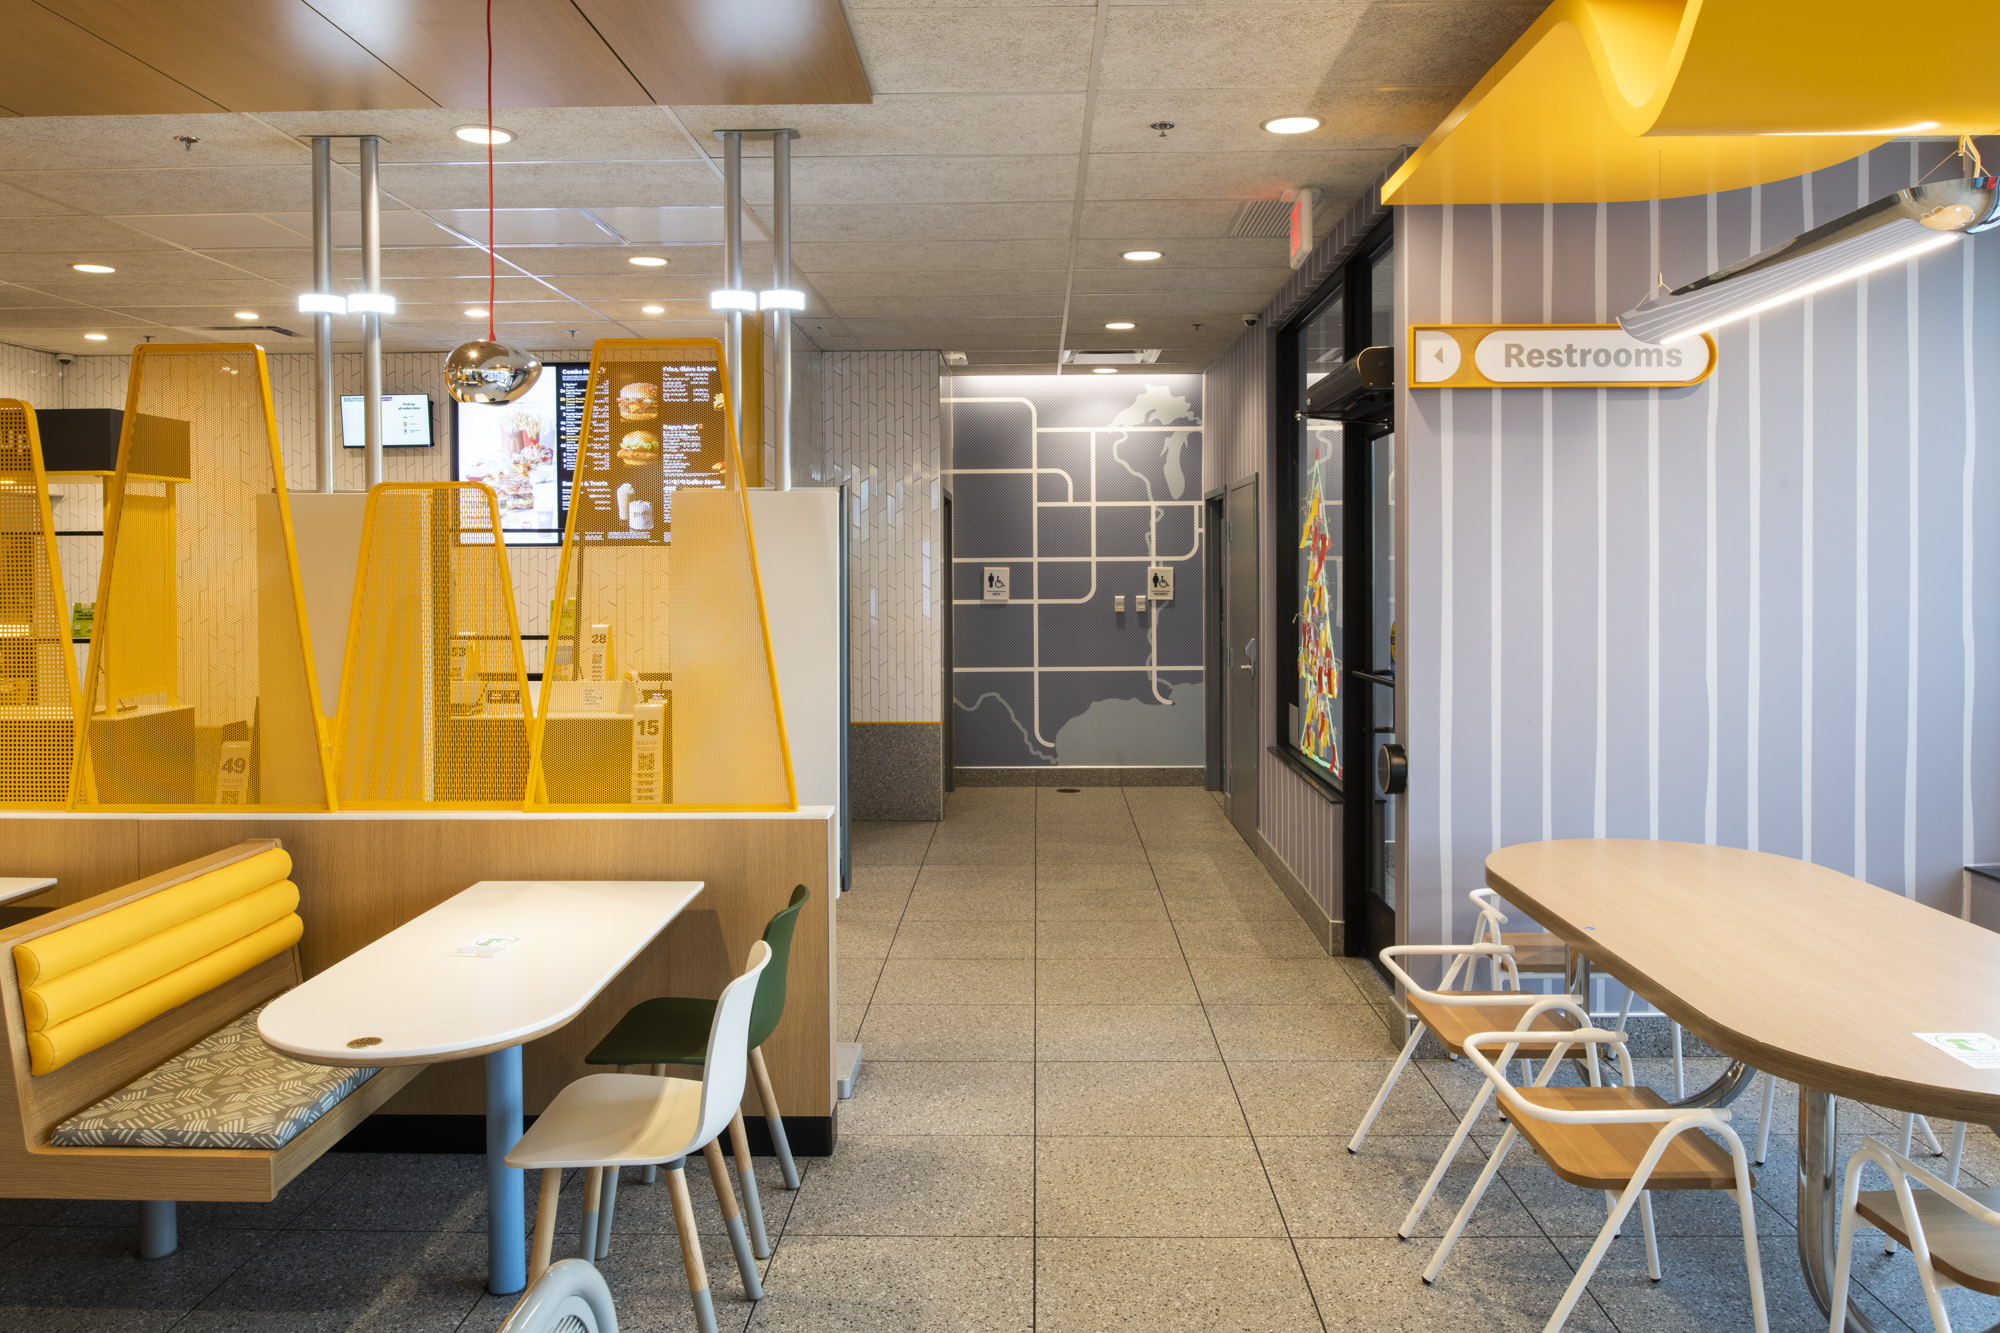 Mcdonald's Dining Room Of The Future